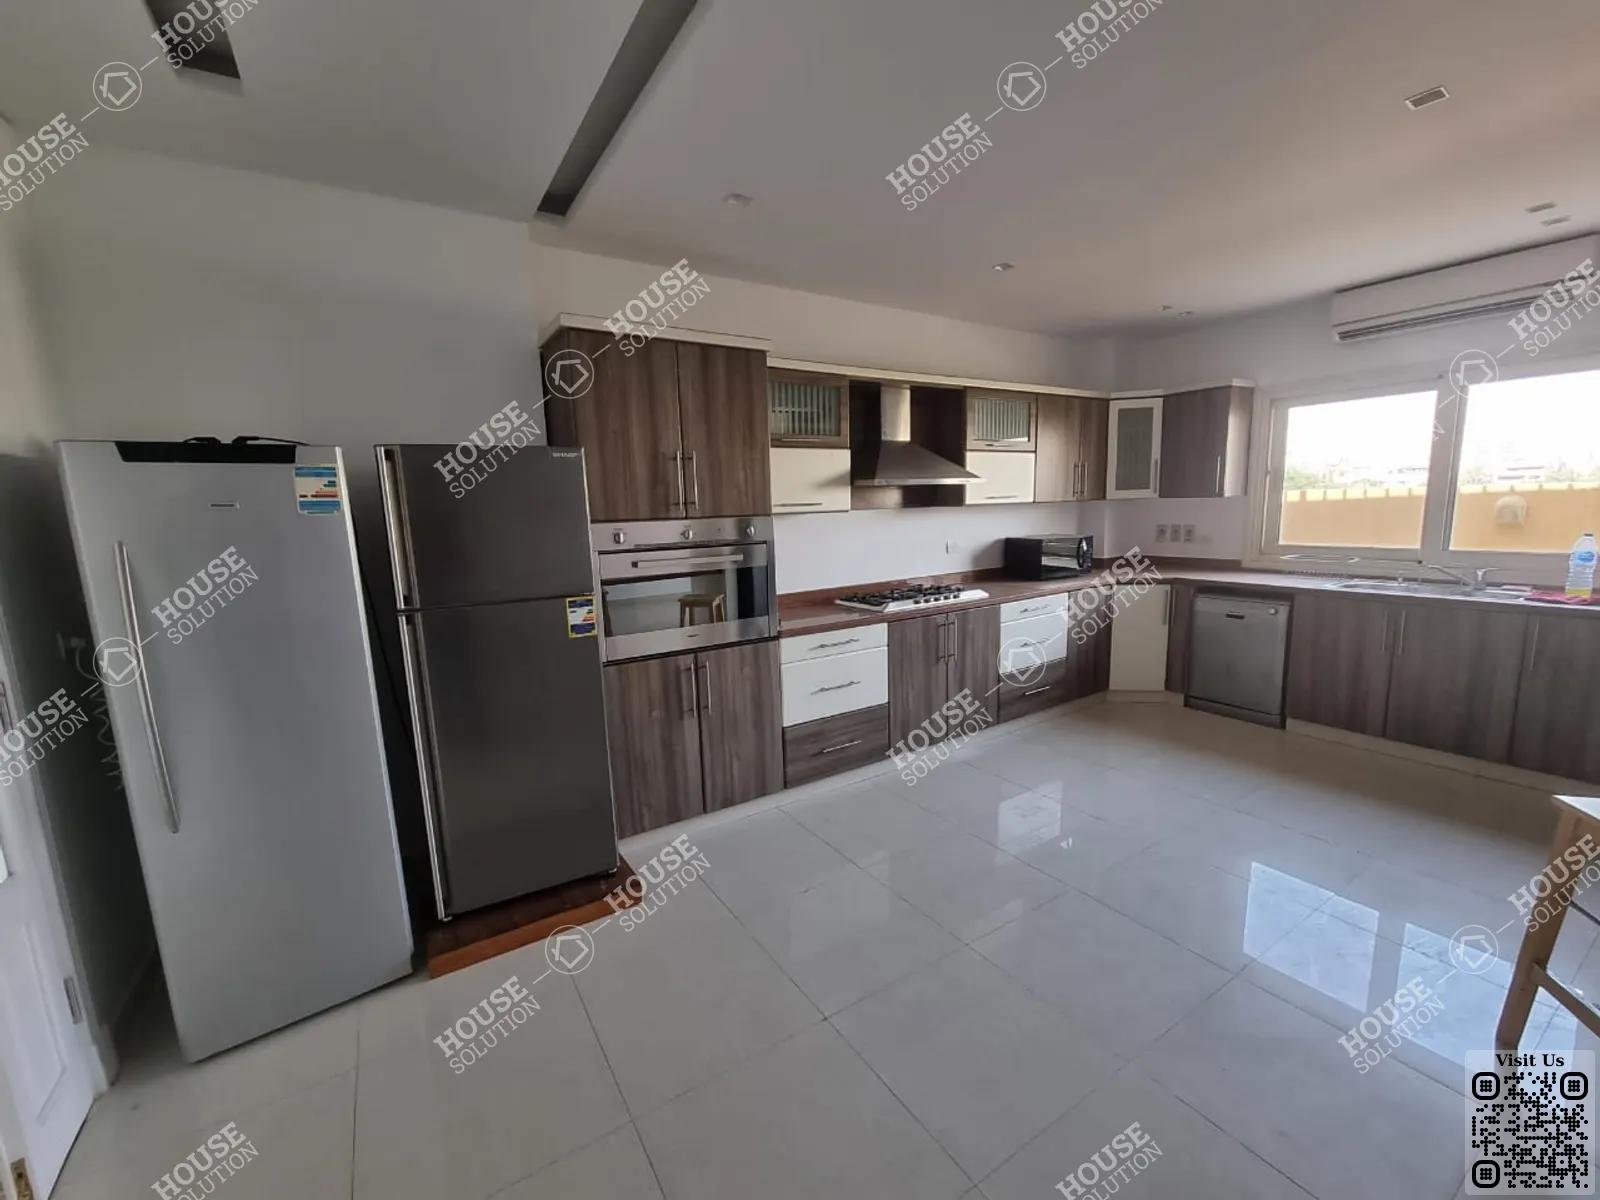 KITCHEN  @ Penthouses For Rent In Maadi Maadi Sarayat Area: 500 m² consists of 4 Bedrooms 4 Bathrooms Modern furnished 5 stars #4683-2